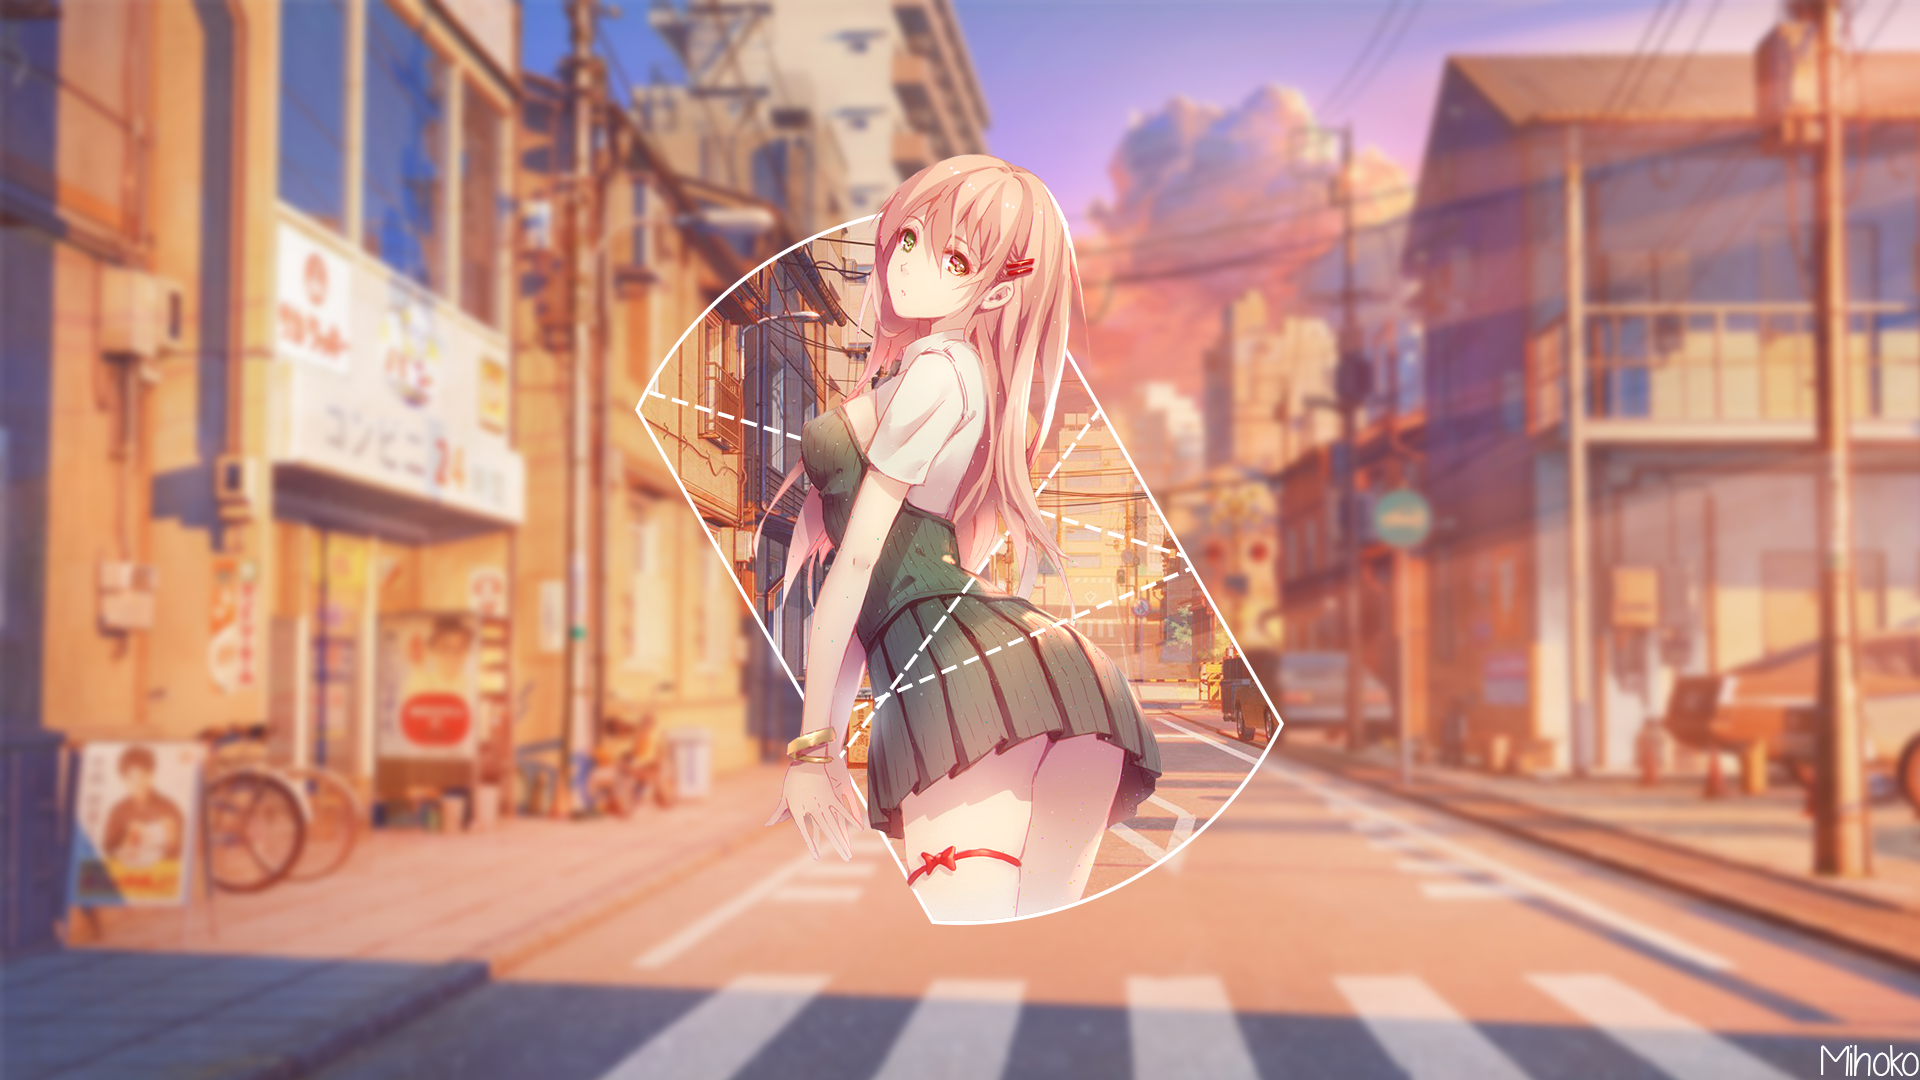 Anime 1920x1080 anime anime girls picture-in-picture blurred